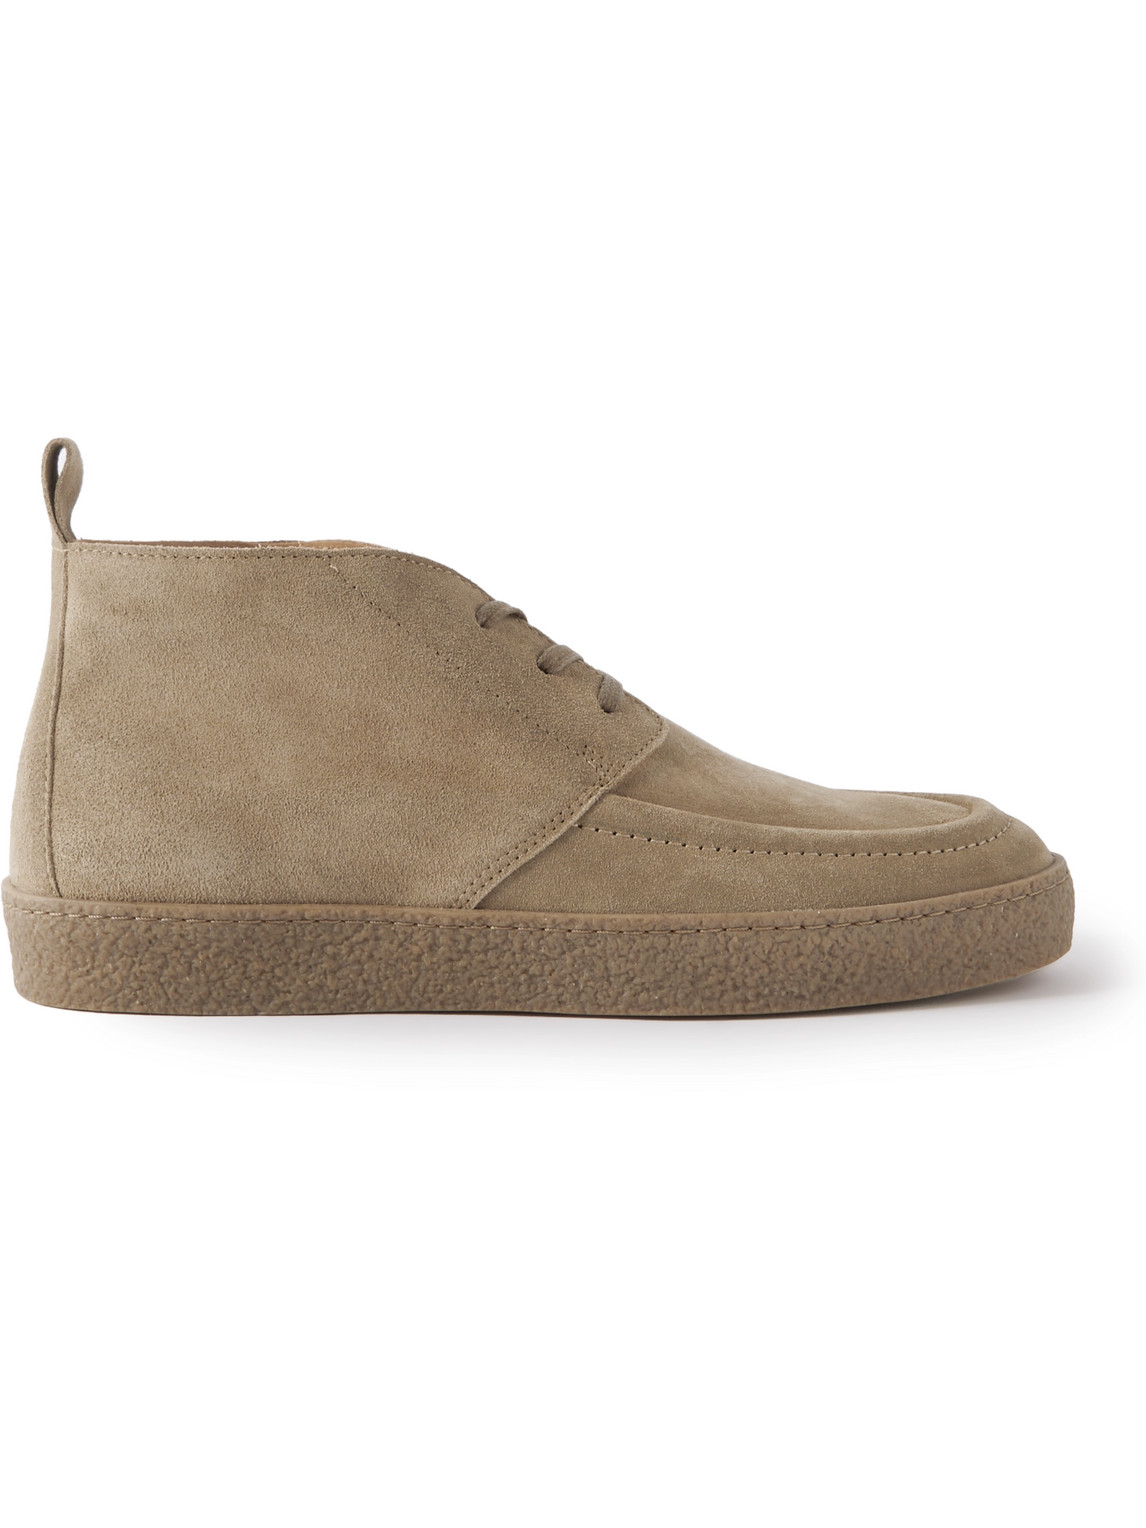 Mr P. Larry Regenerated Suede By Evolo® Chukka Boots In Neutrals